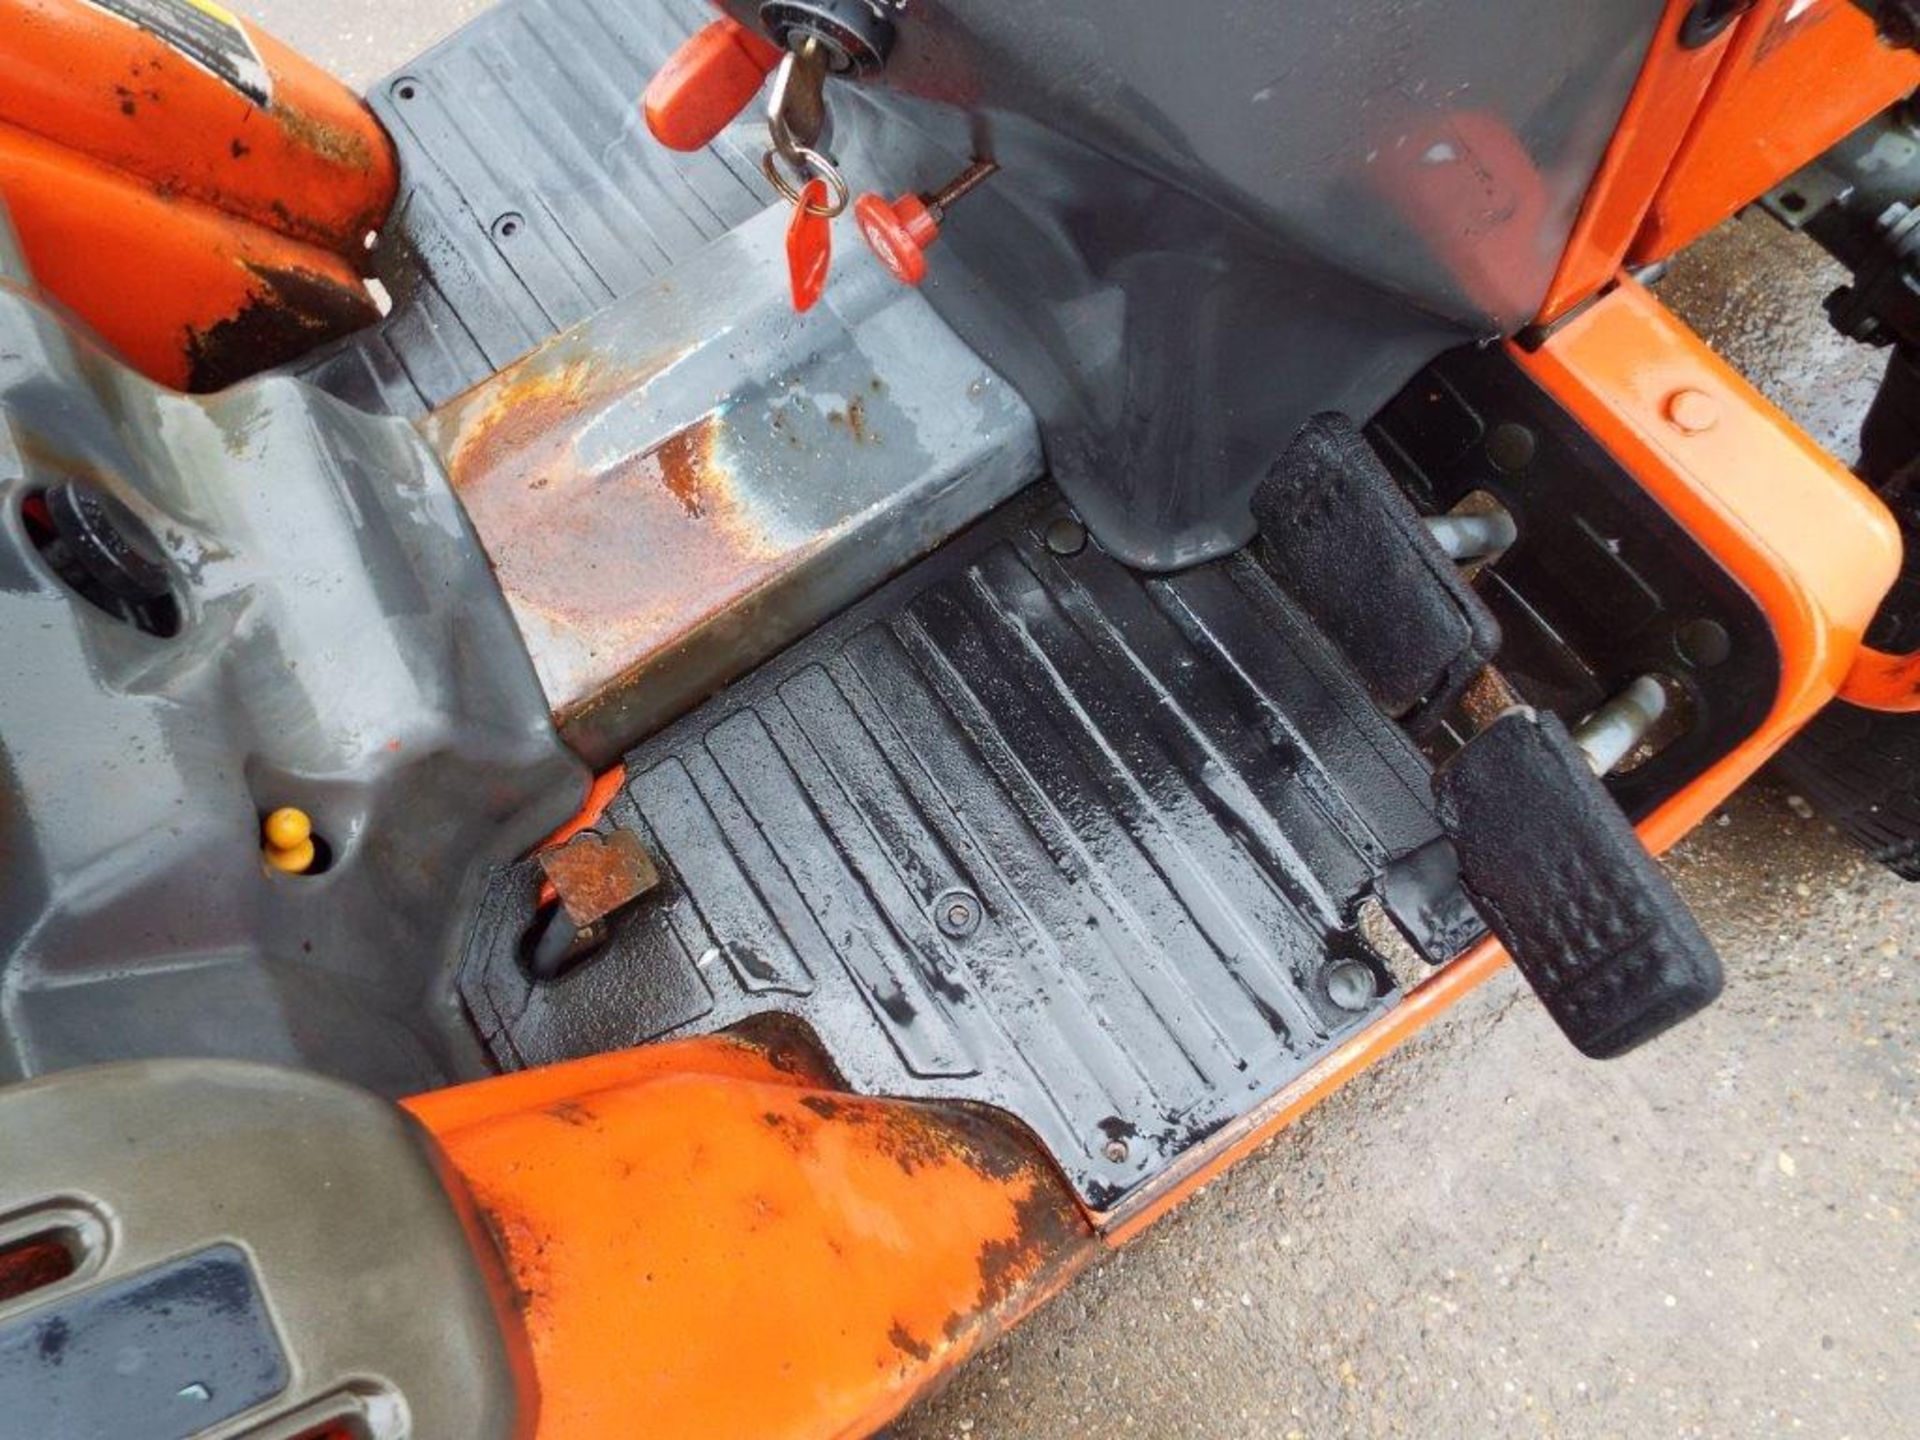 Kubota B1410D 4WD Diesel Powered Compact Tractor with Hydraulic Snow Plough Attachment - Image 18 of 25